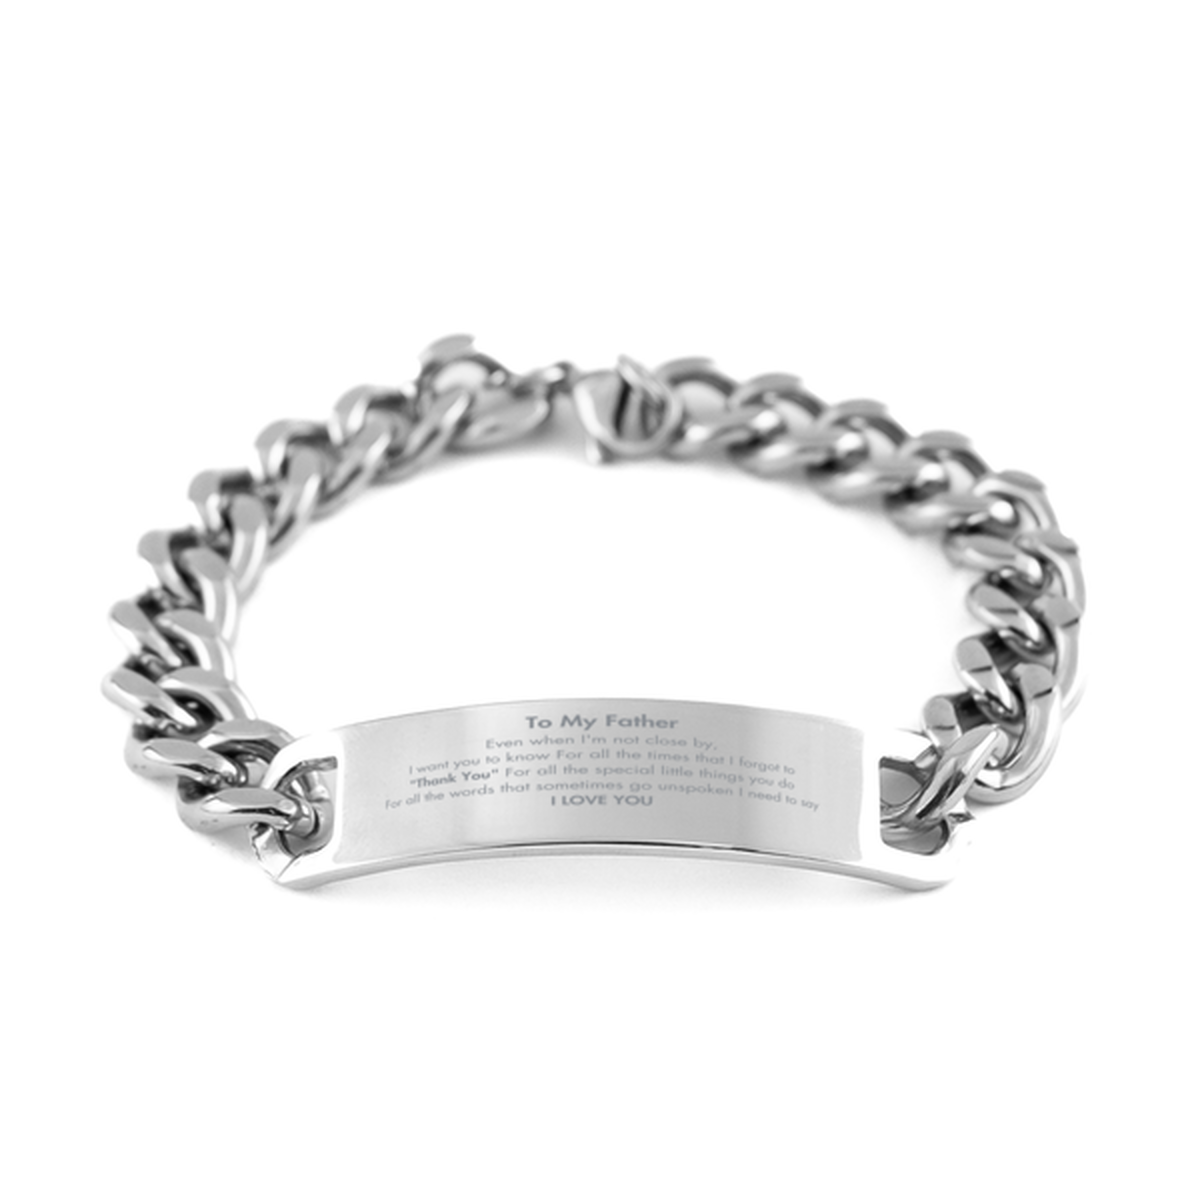 Thank You Gifts for Father, Keepsake Cuban Chain Stainless Steel Bracelet Gifts for Father Birthday Mother's day Father's Day Father For all the words That sometimes go unspoken I need to say I LOVE YOU